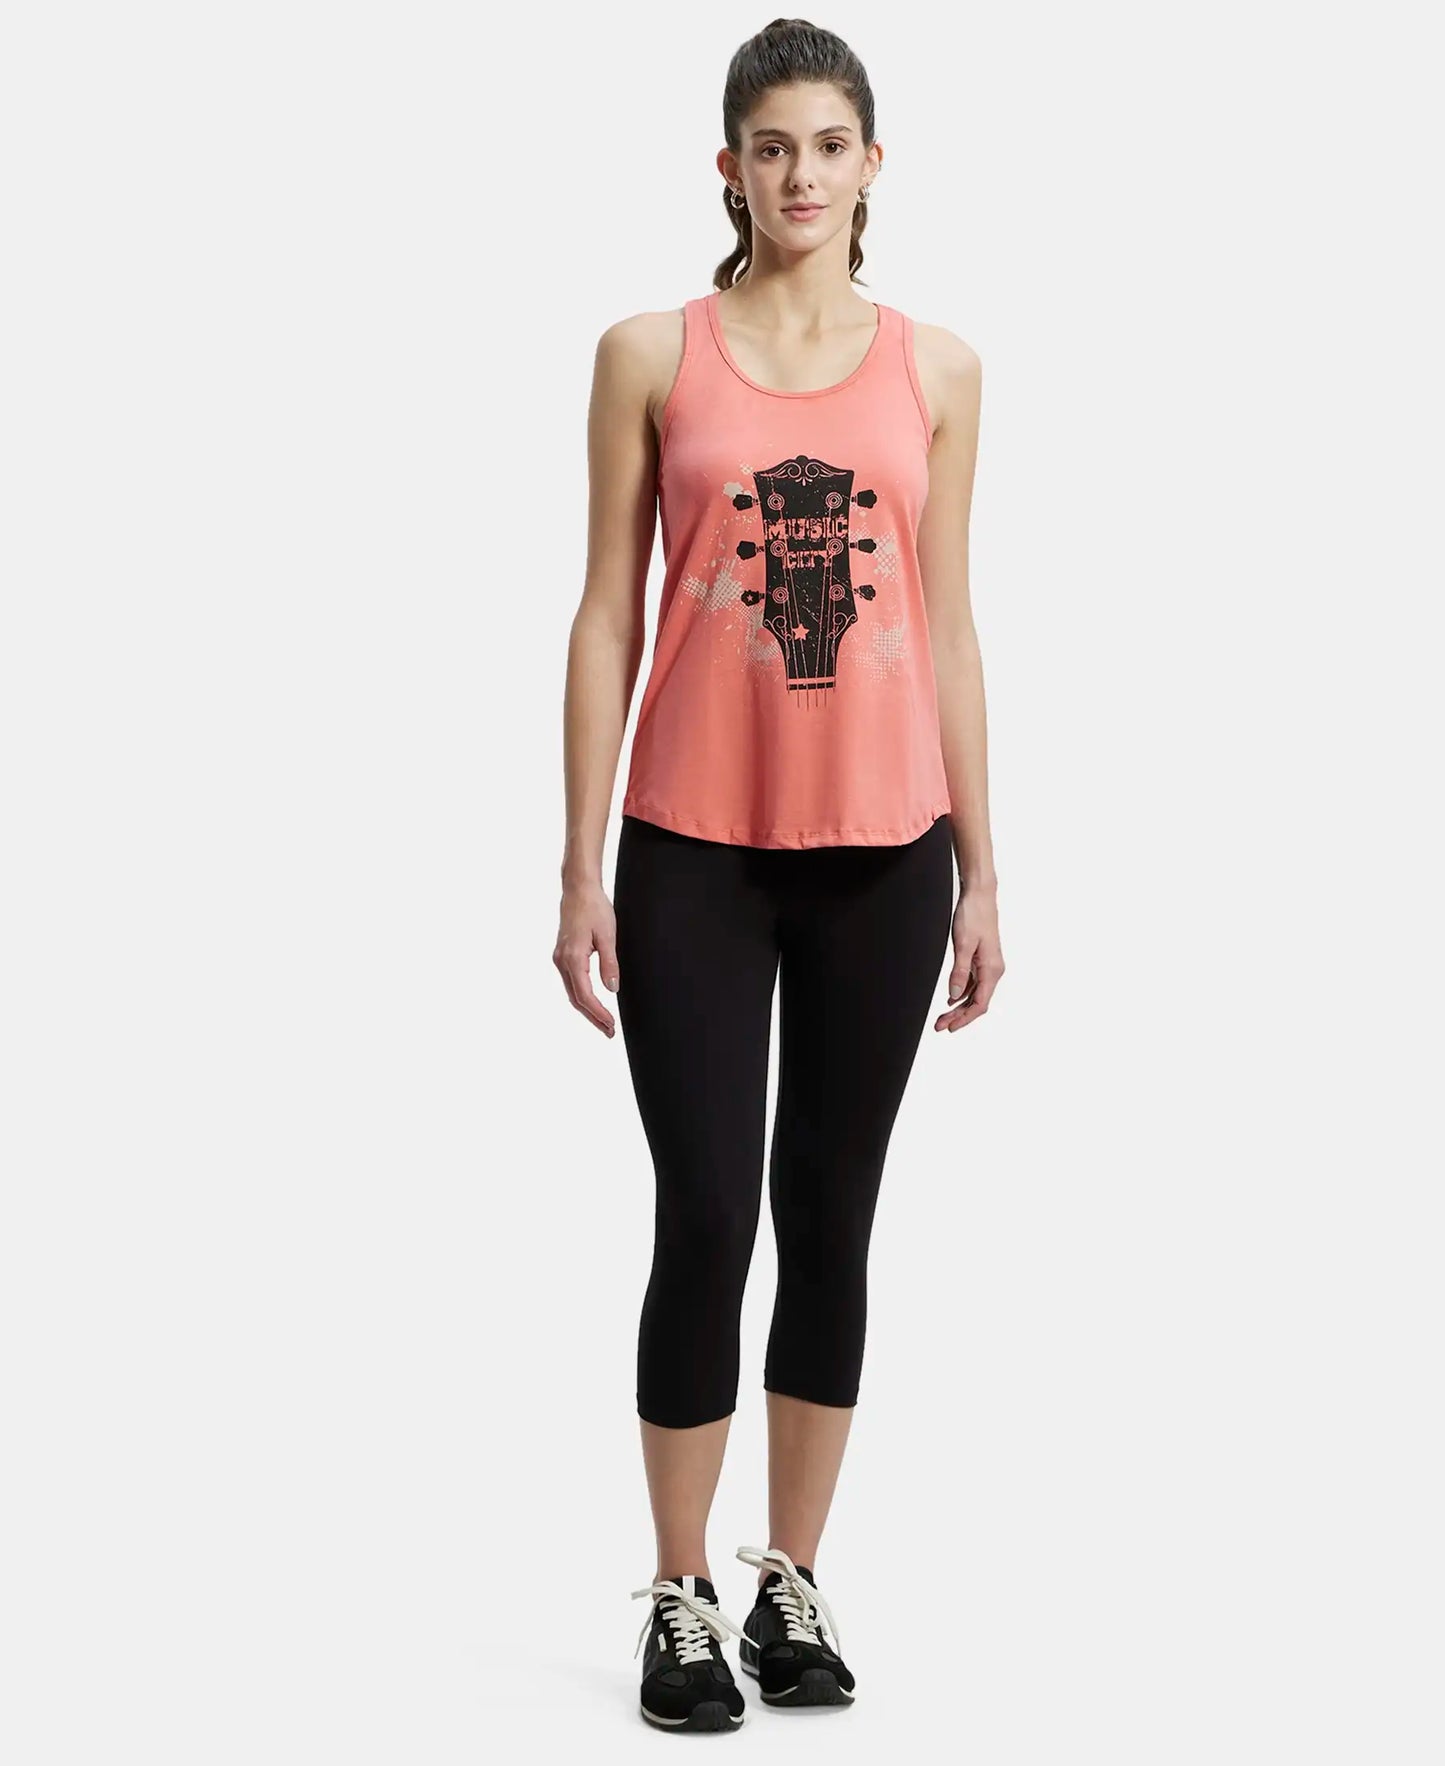 Super Combed Cotton Graphic Printed Racerback Styled Tank Top - Blush Pink-4